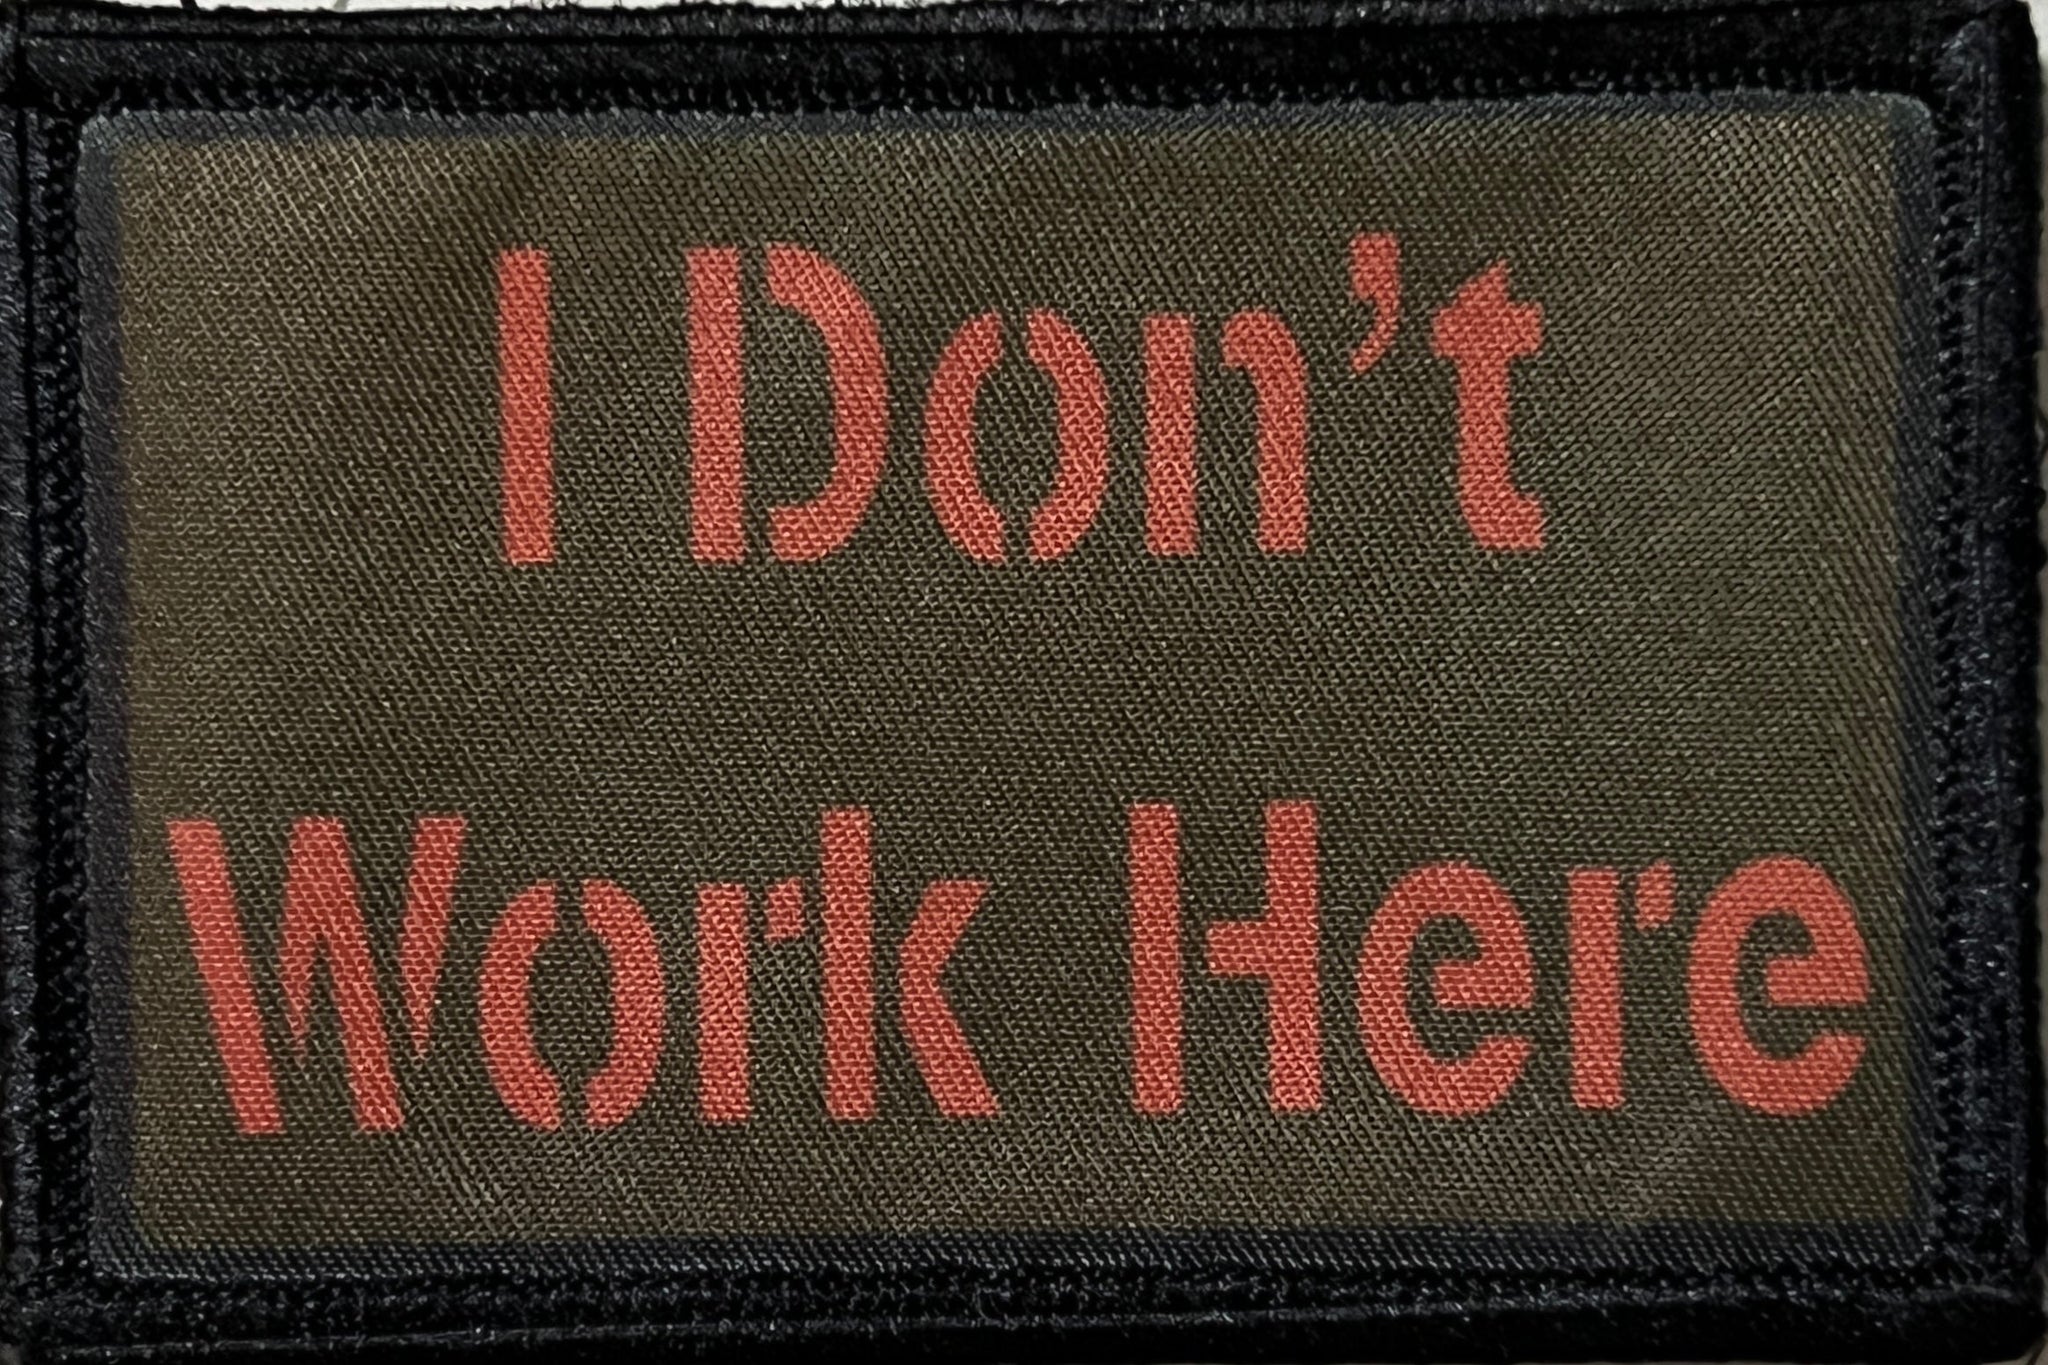 I Don't Work Here Funny Morale Patch